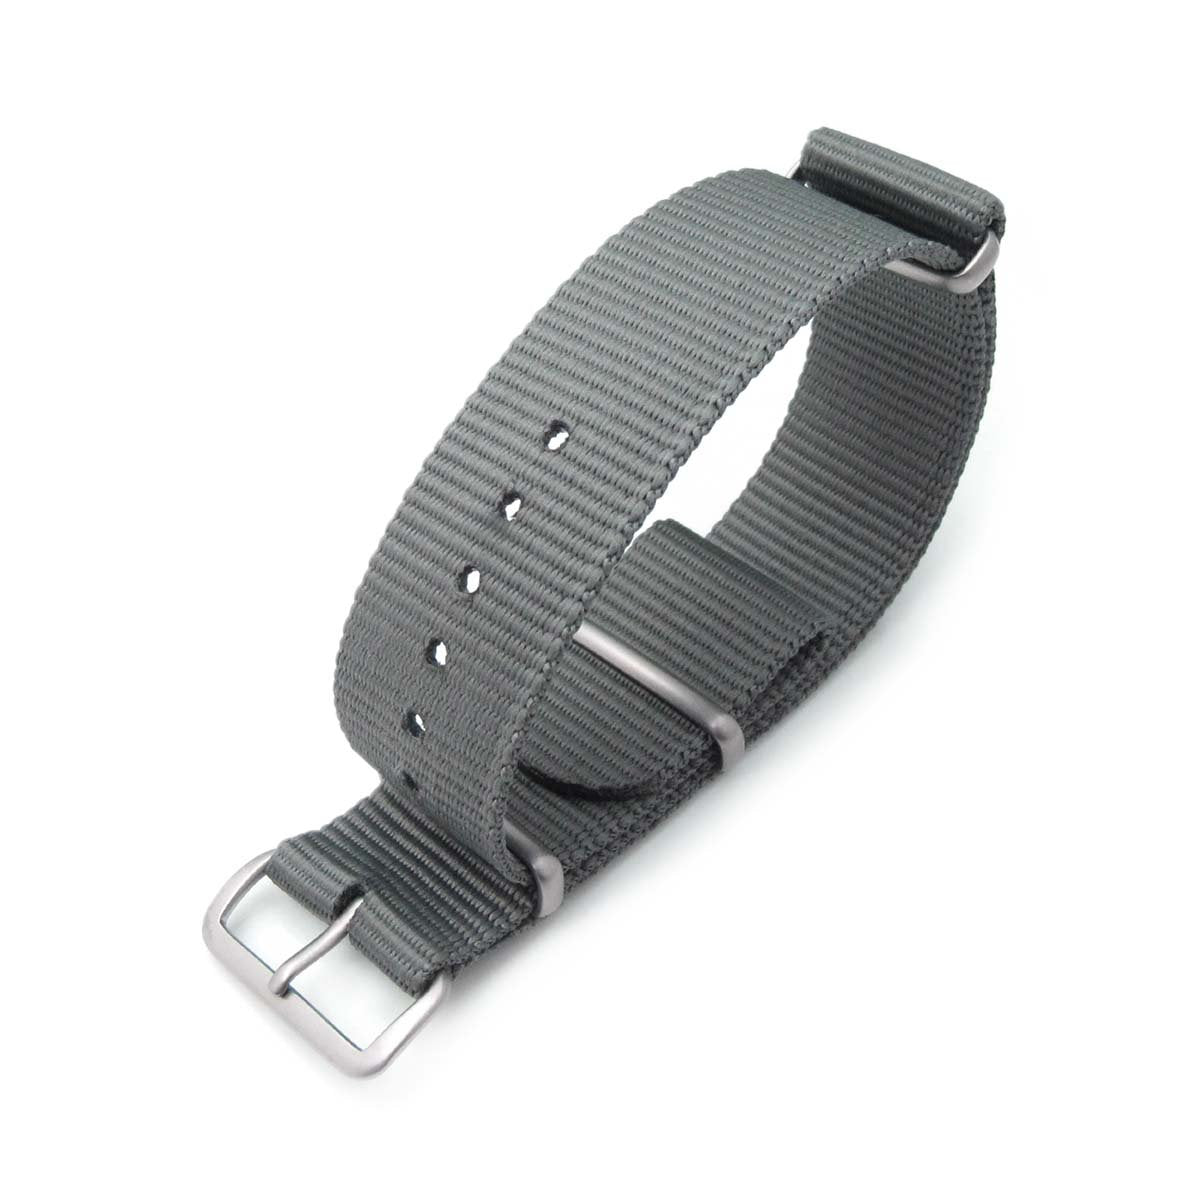 MiLTAT 22mm G10 Military Watch Strap Ballistic Nylon Armband Brushed Military Grey Strapcode Watch Bands